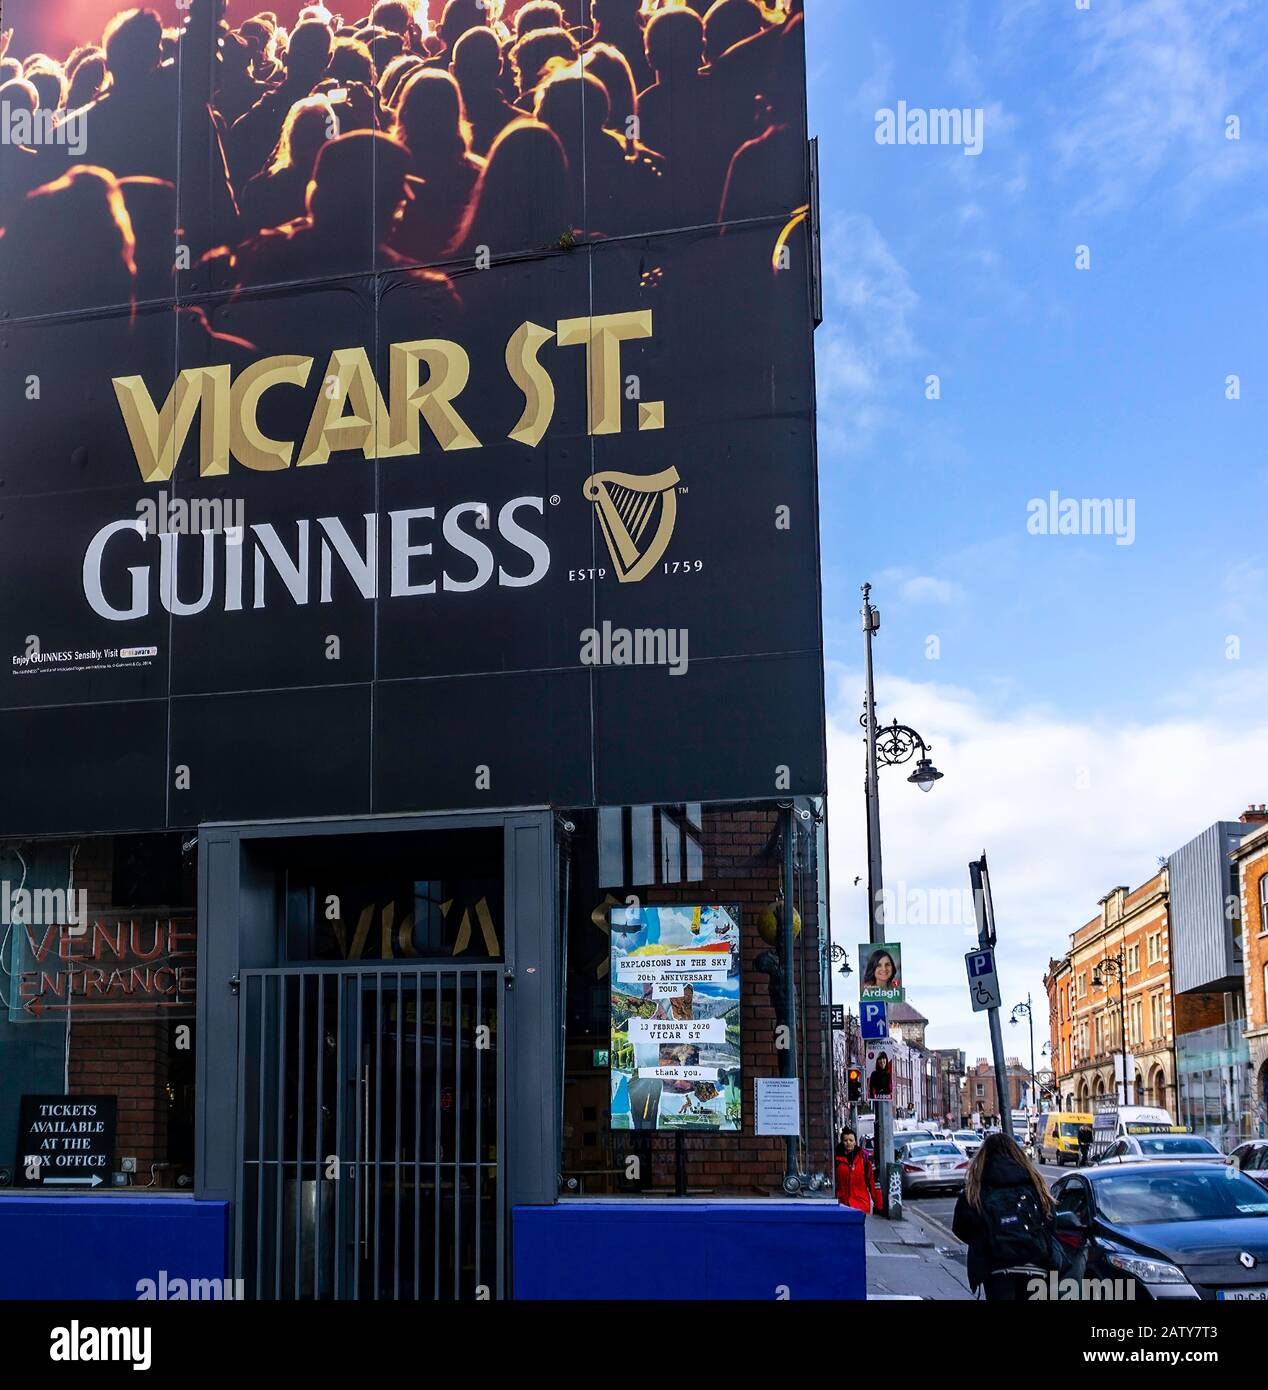 The Vicar Street concert and performing arts venue in Dublin off Thomas Street. Stock Photo